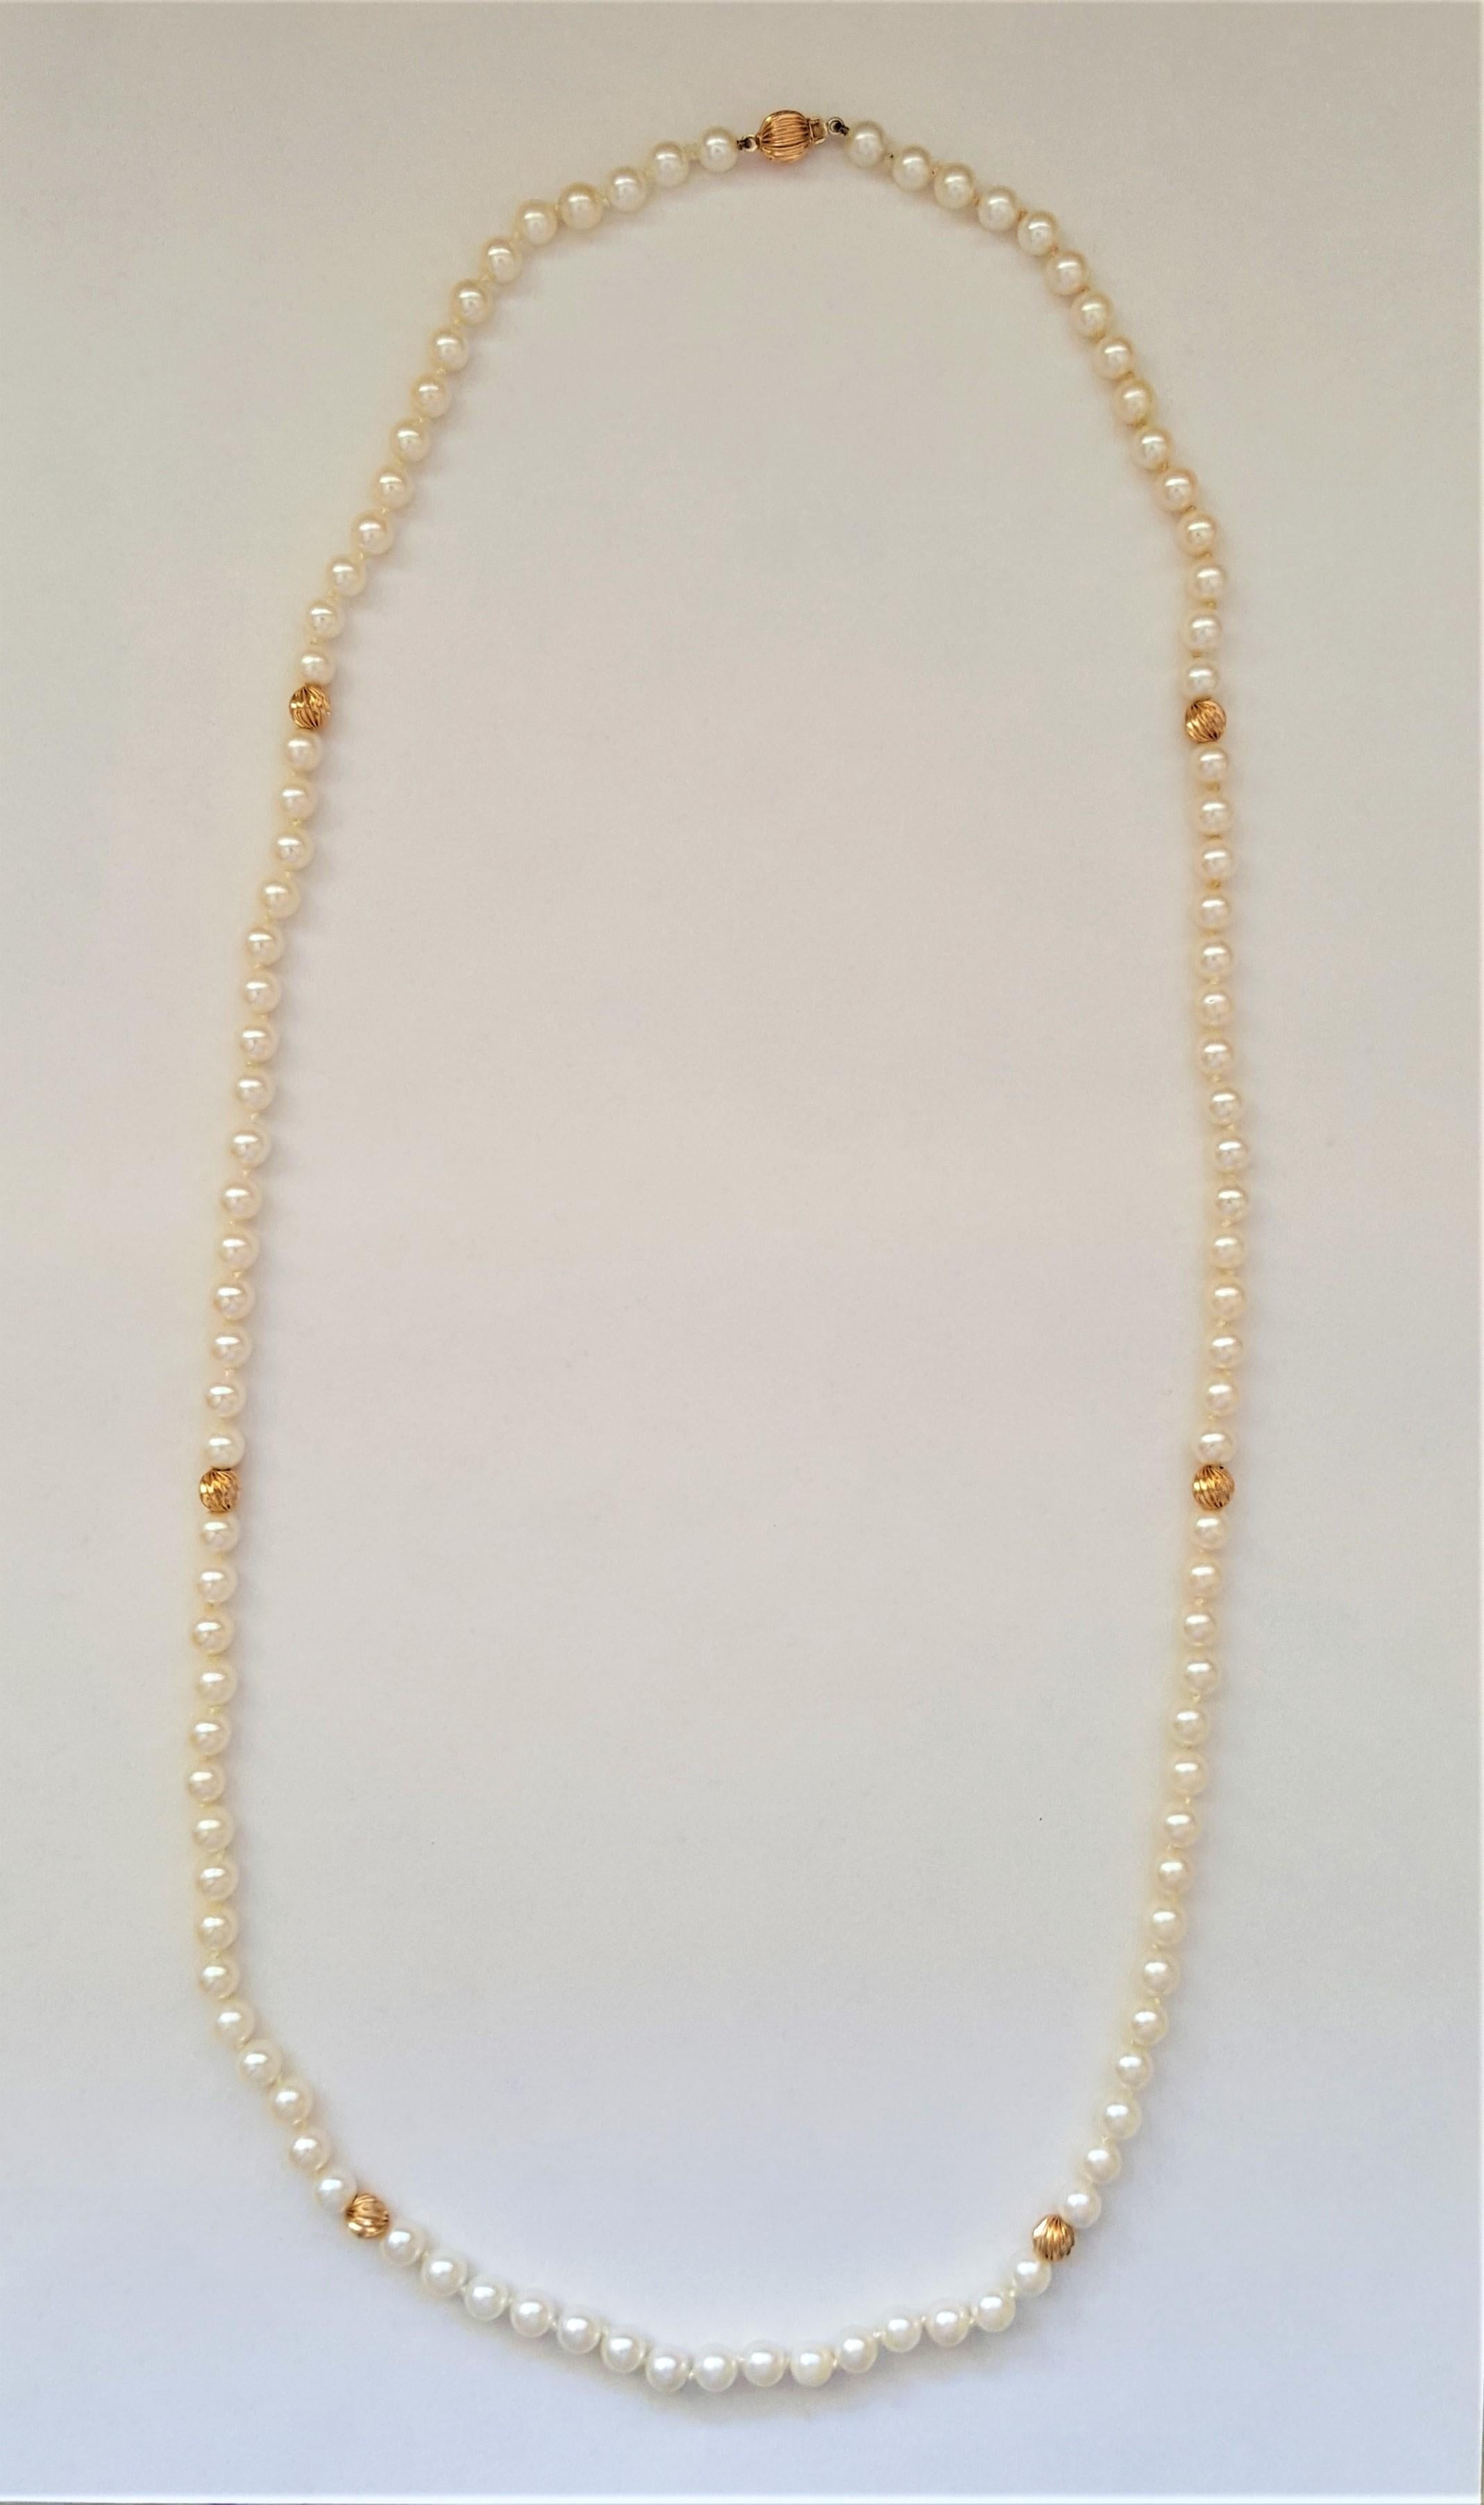 vintage necklace 1970's Modern Pearl necklace Hematite and gold tone beads Single Long Strand of seed Pearls